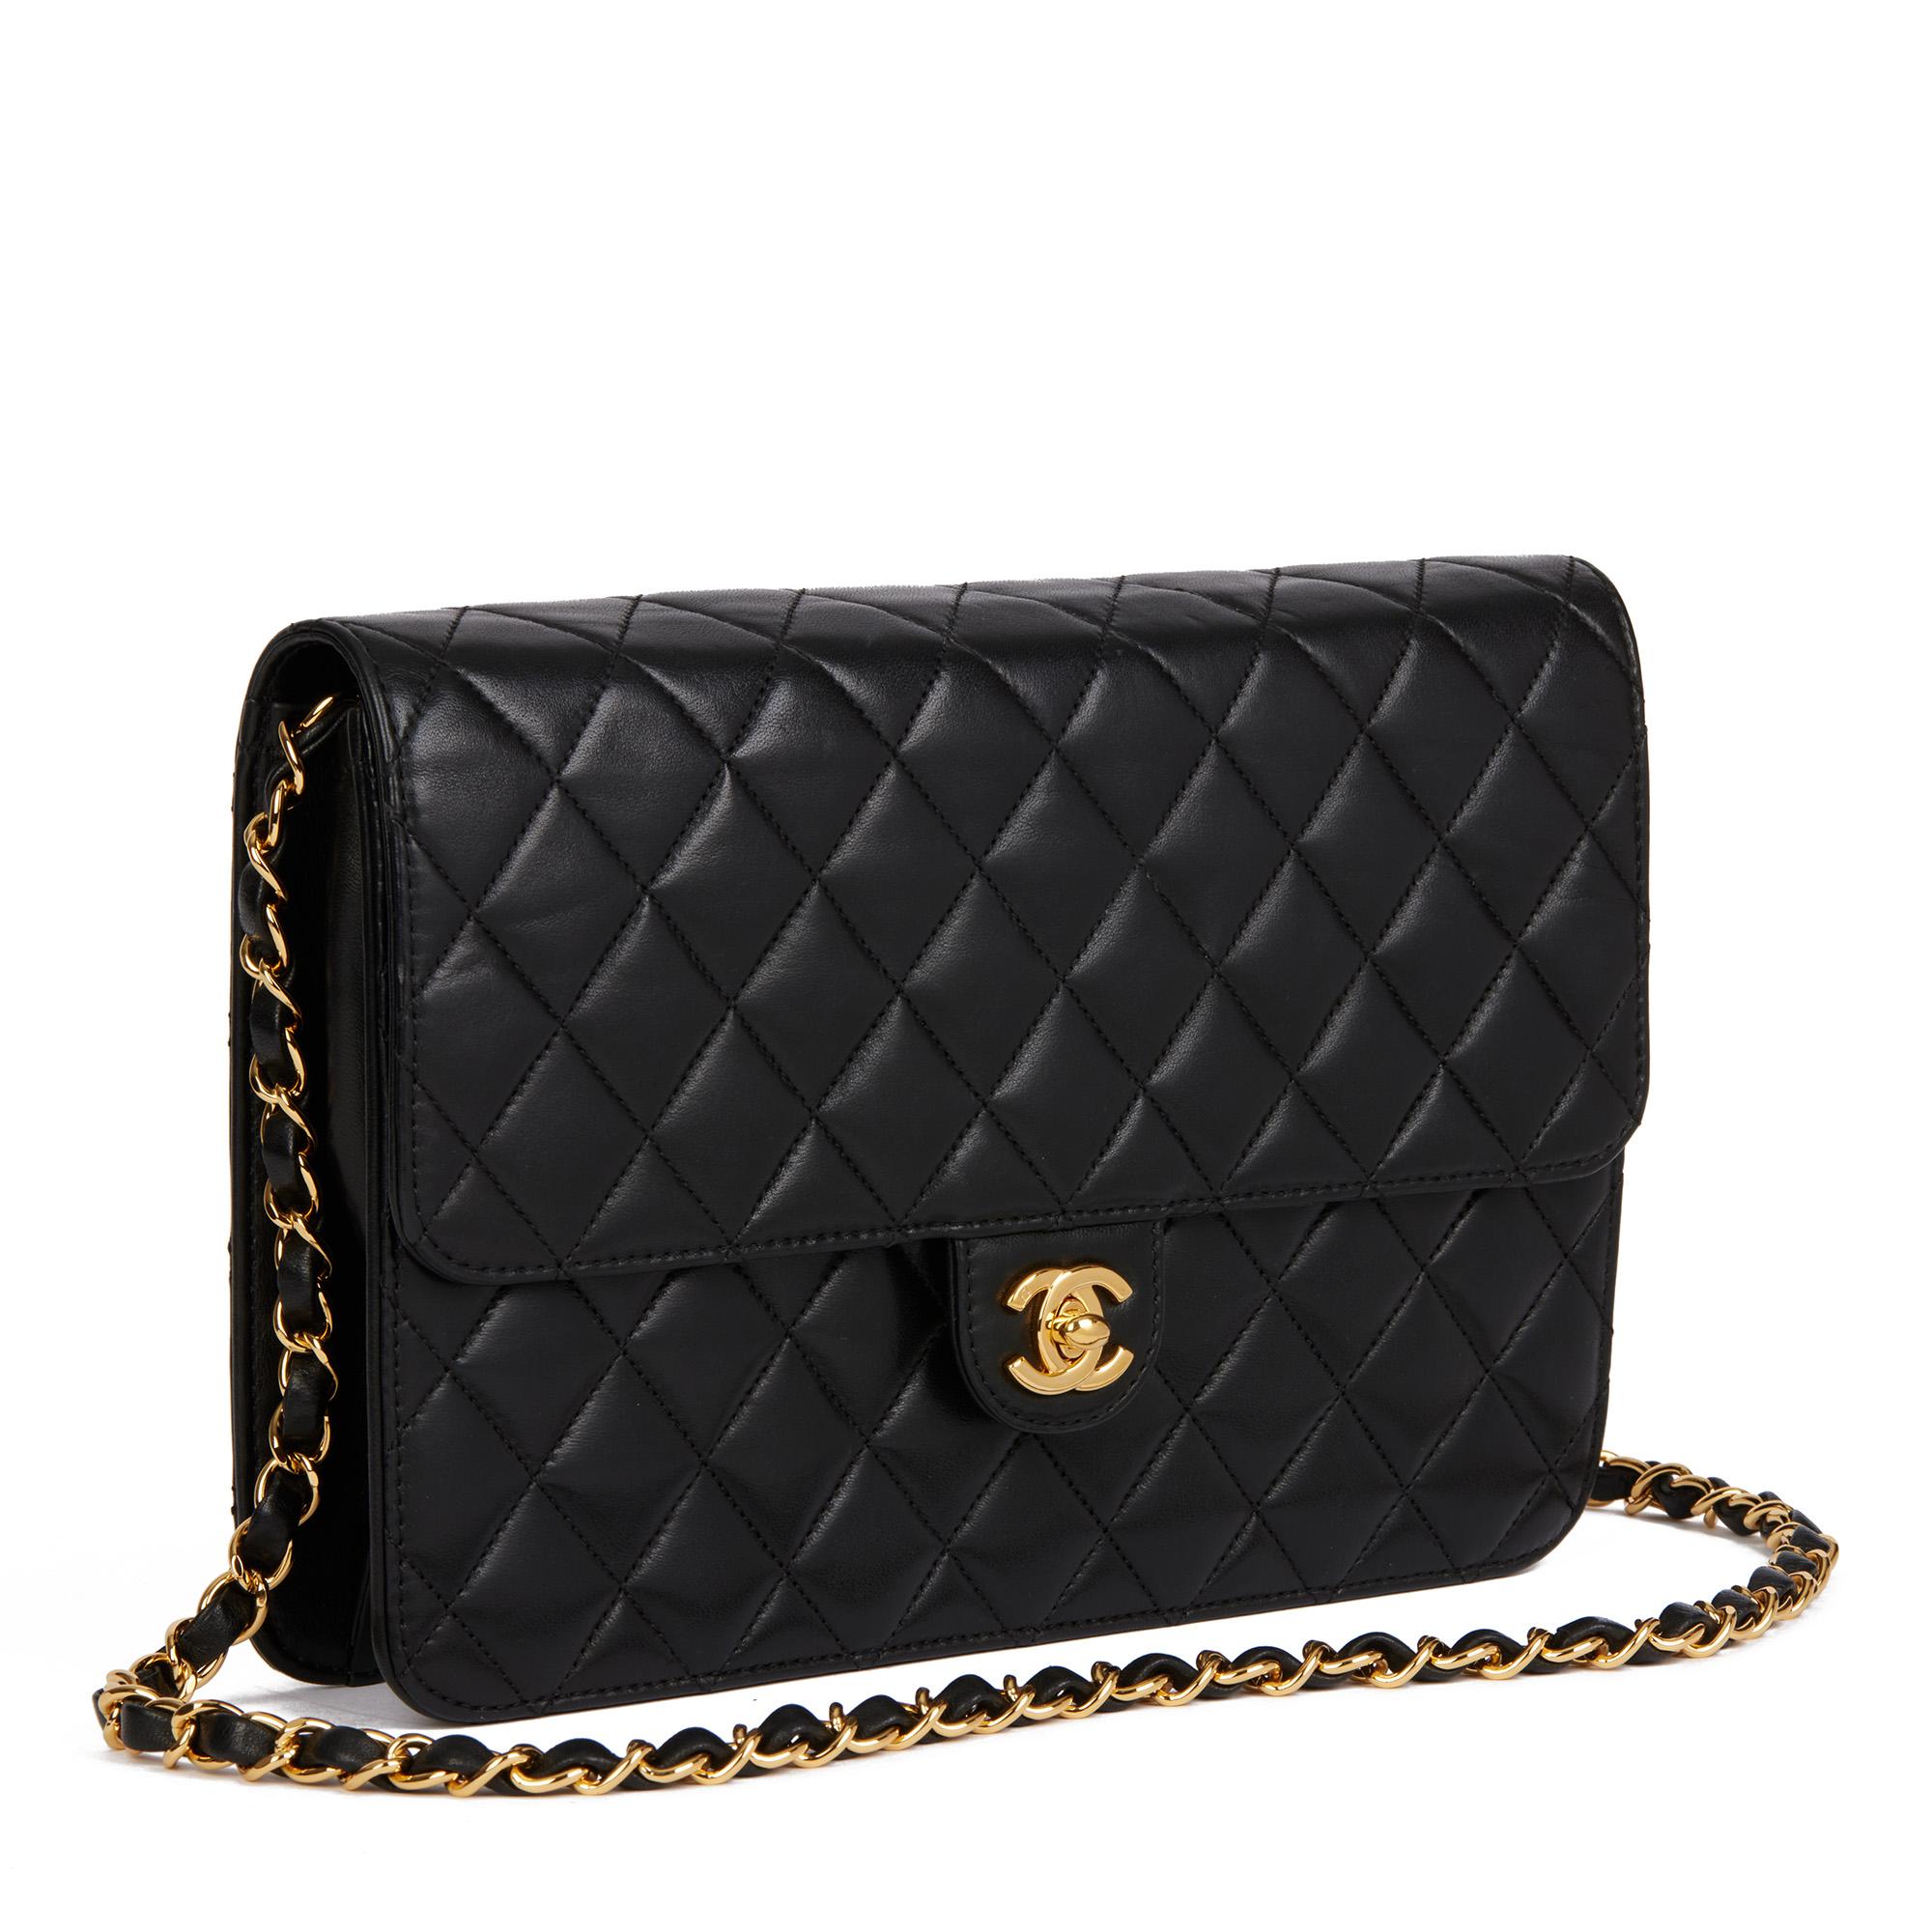 CHANEL
Black Quilted Lambskin Medium Classic Single Flap Bag

Xupes Reference: HB4729
Serial Number: 11270676
Age (Circa): 2006
Accompanied By: Authenticity Card
Authenticity Details: Authenticity Card, Serial Sticker (Made in France)
Gender: